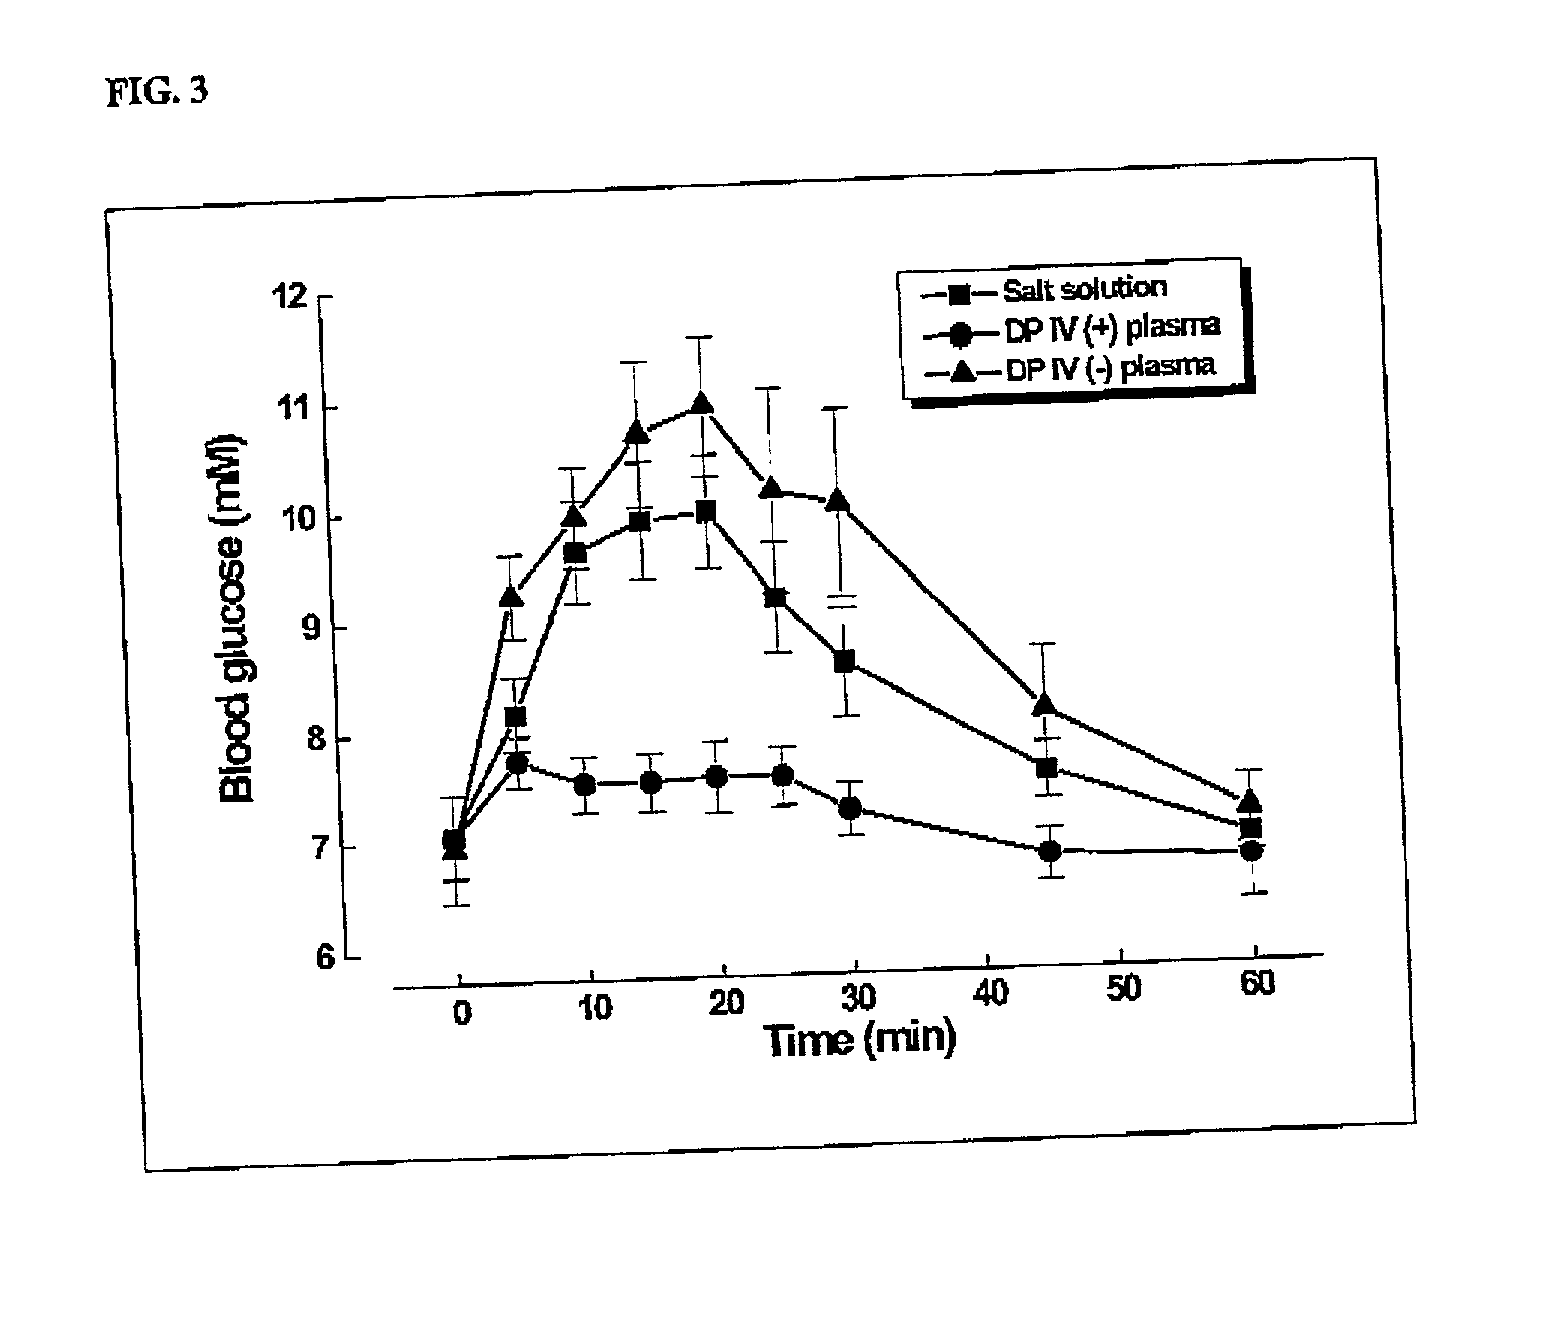 Method for raising the blood glucose level in mammals